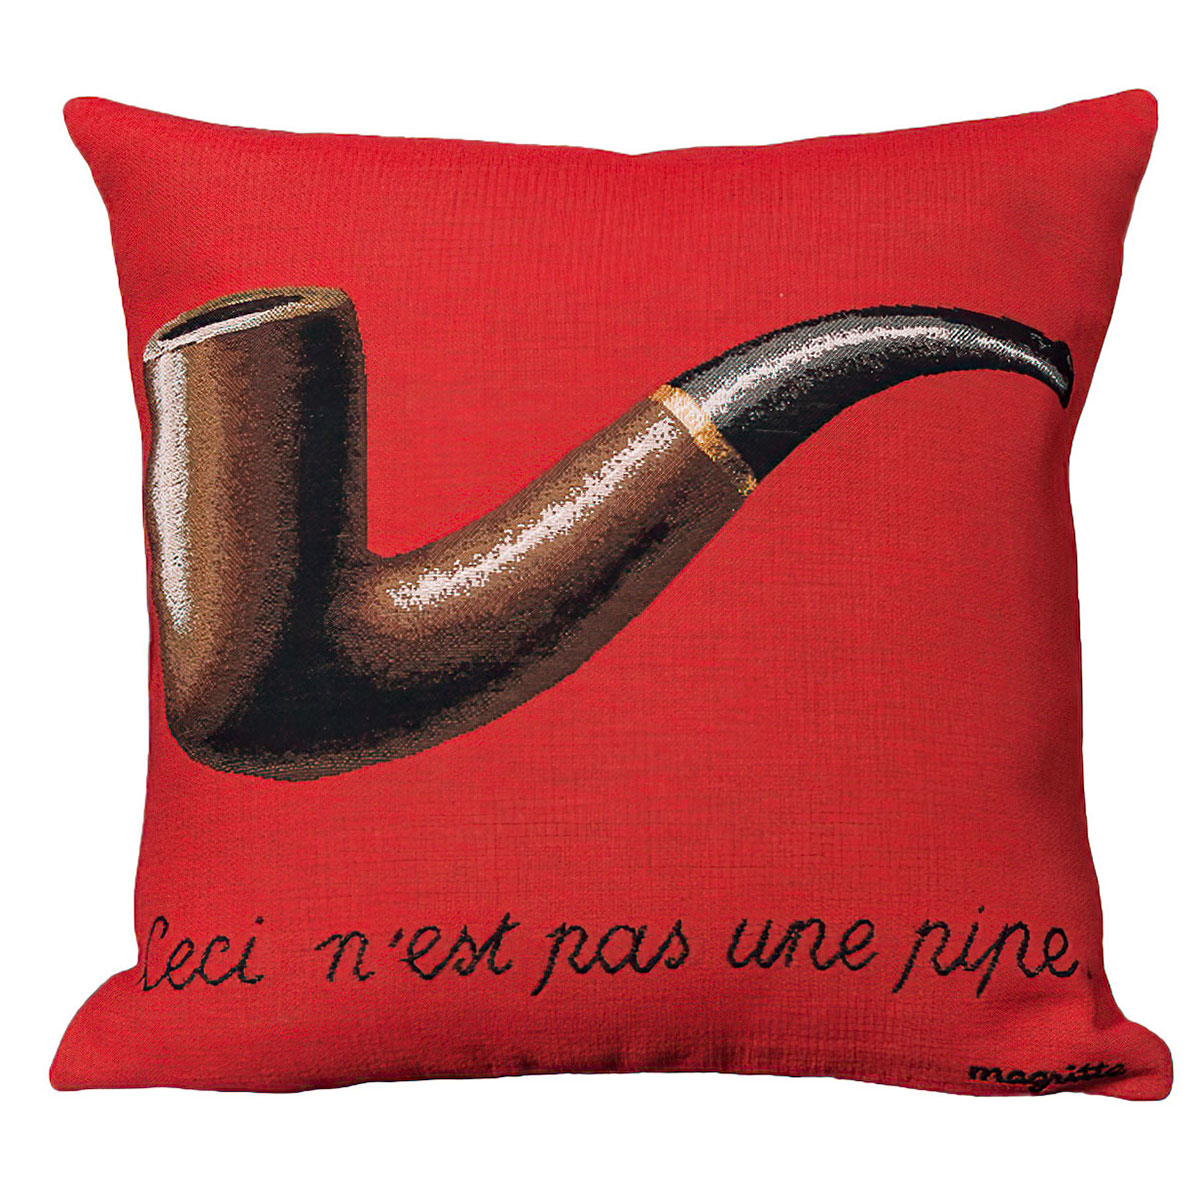 René Magritte Cushion cover : The Treachery of Images (1929) - red